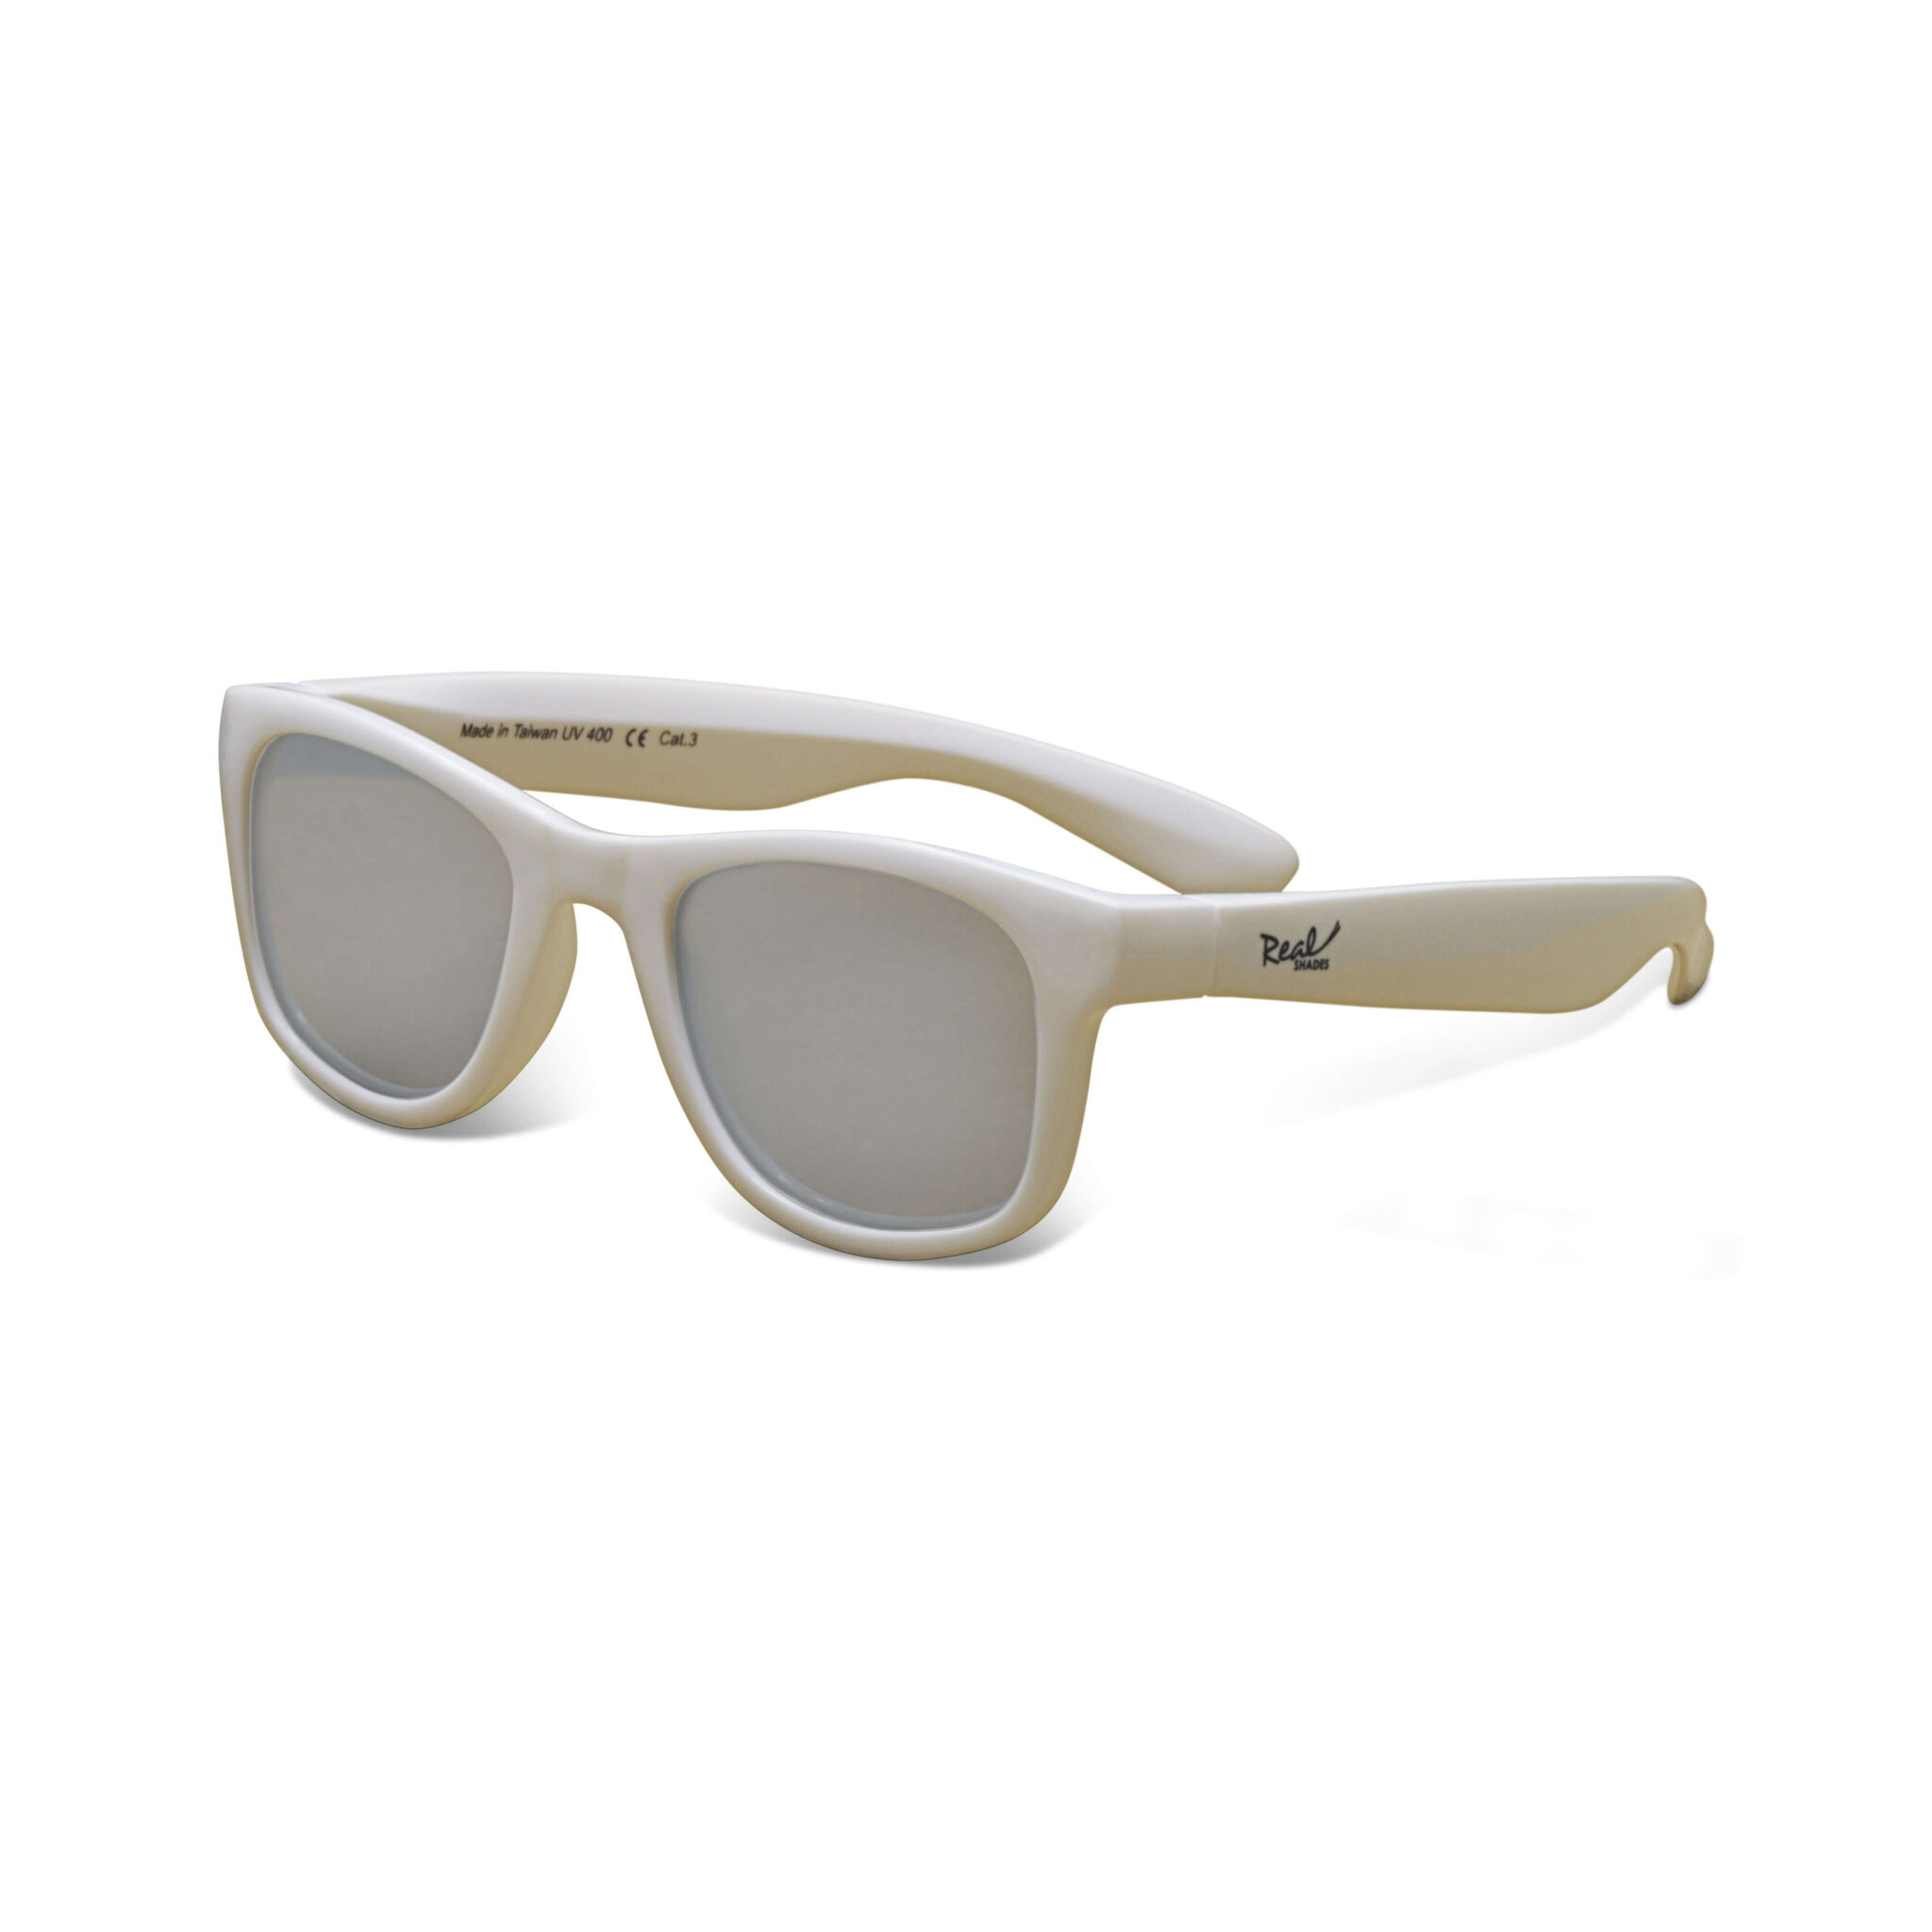 Real Shades Surf Sunglasses for Babies - Ages 0+ White